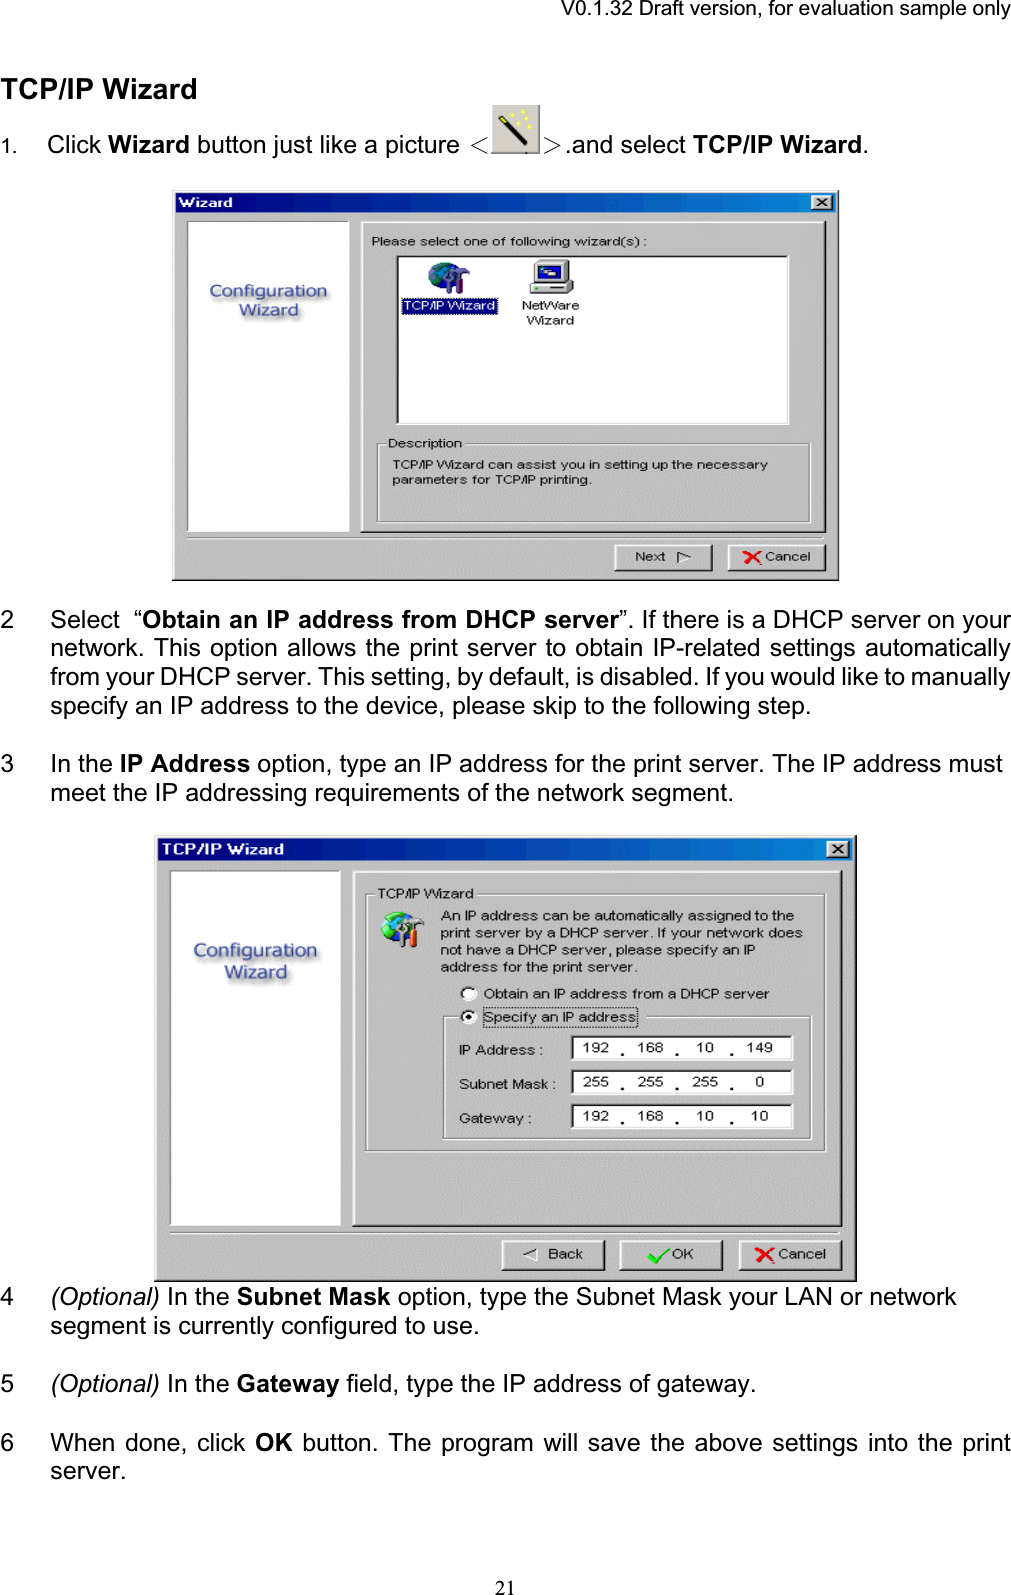 V0.1.32 Draft version, for evaluation sample onlyTCP/IP Wizard 1. Click Wizard button just like a picture І Ї.and select TCP/IP Wizard.2 Select  “Obtain an IP address from DHCP server”. If there is a DHCP server on your network. This option allows the print server to obtain IP-related settings automatically from your DHCP server. This setting, by default, is disabled. If you would like to manually specify an IP address to the device, please skip to the following step. 3 In the IP Address option, type an IP address for the print server. The IP address must meet the IP addressing requirements of the network segment. 4(Optional) In the Subnet Mask option, type the Subnet Mask your LAN or network segment is currently configured to use. 5(Optional) In the Gateway field, type the IP address of gateway. 6 When done, click OK button. The program will save the above settings into the print server.21